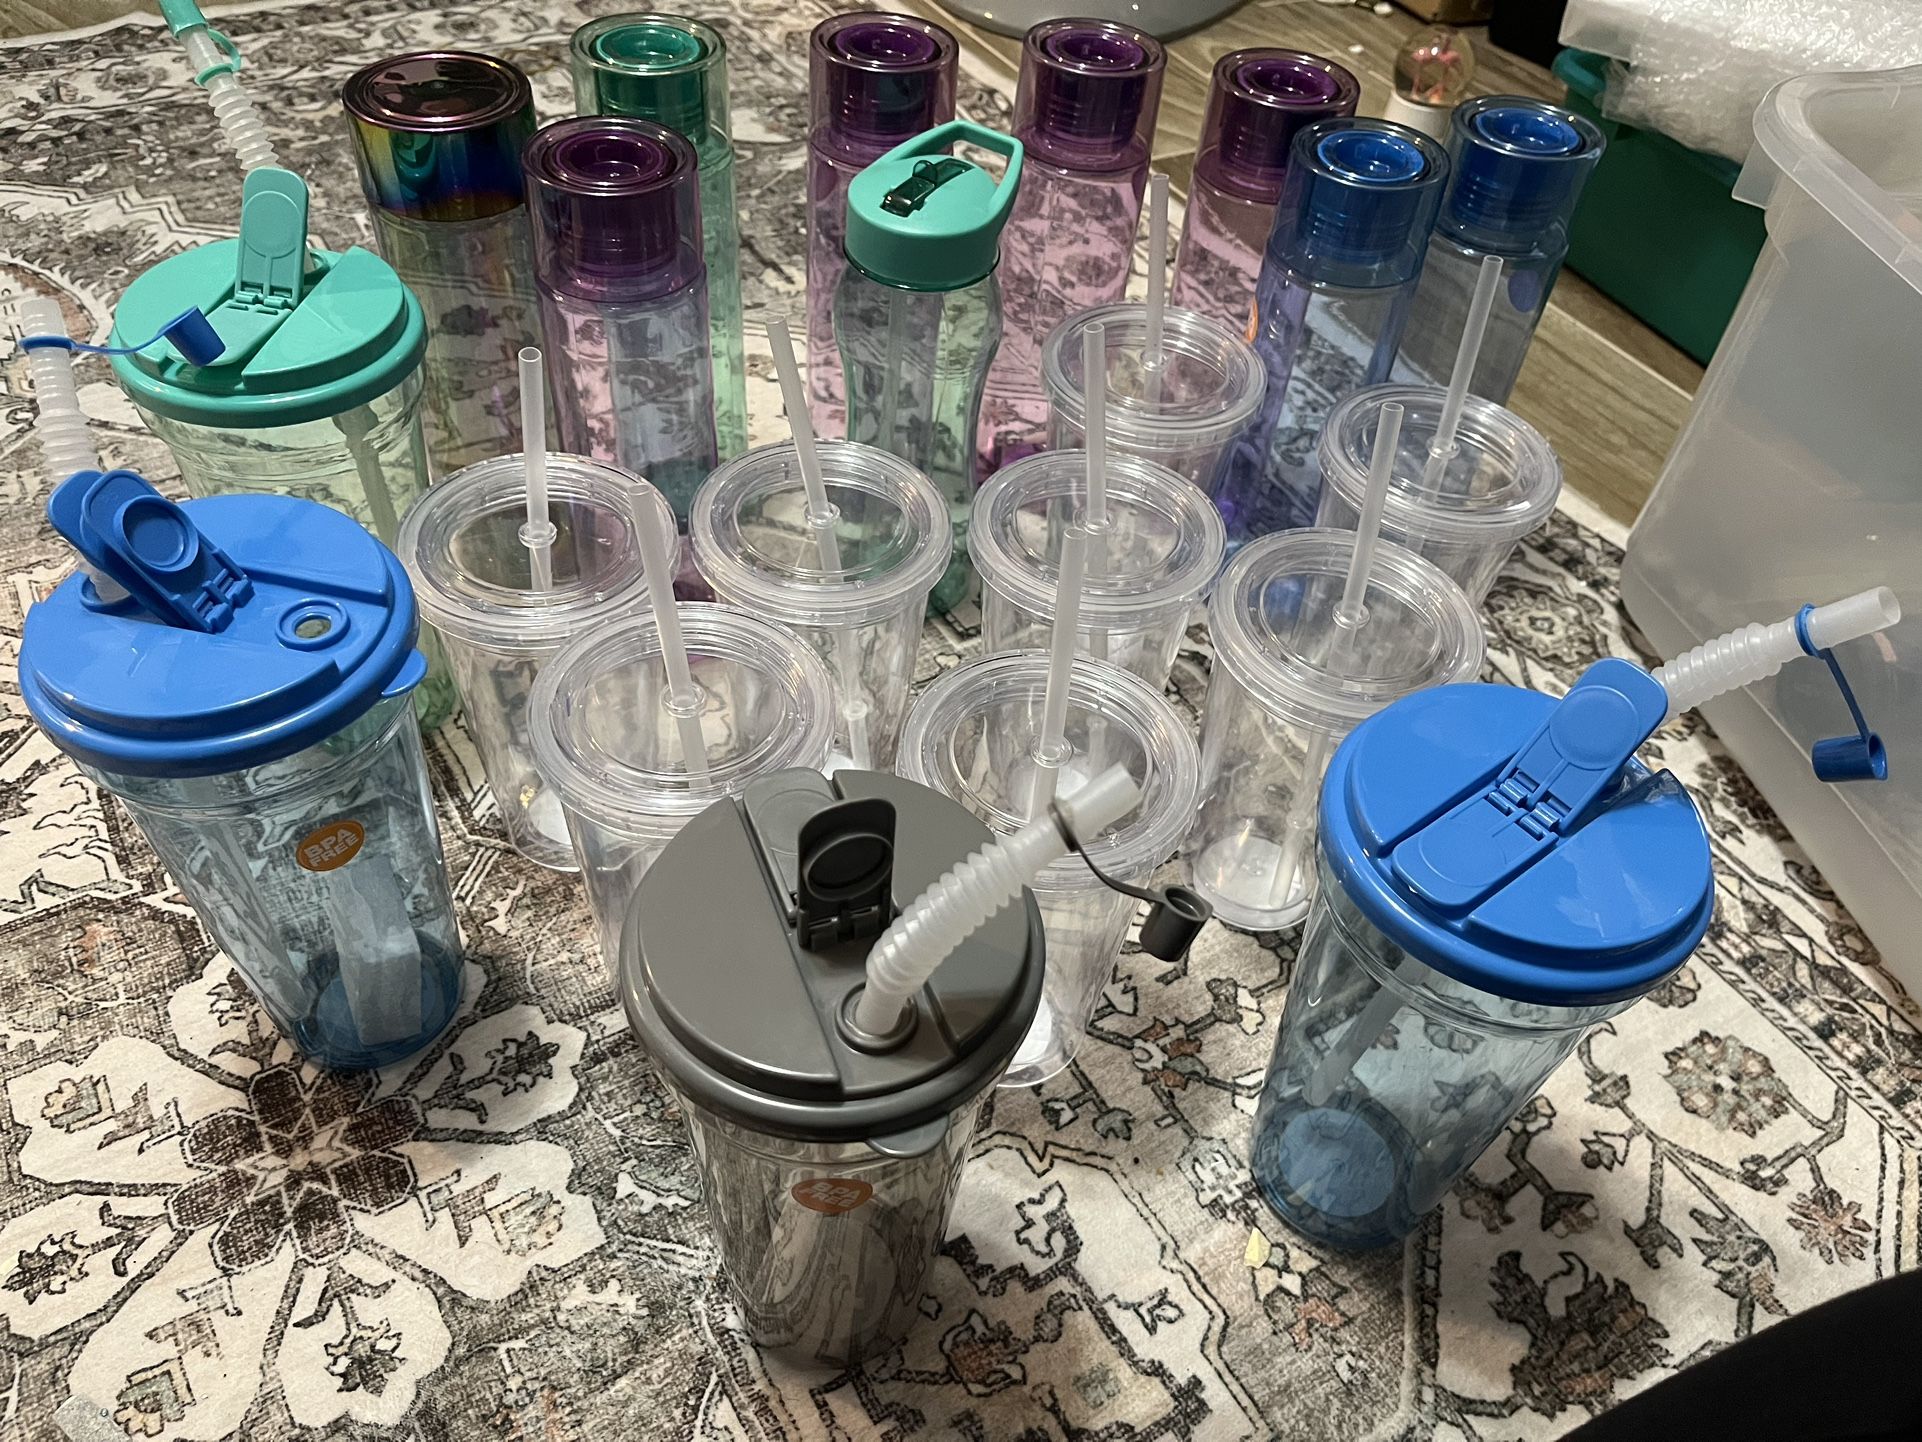 New Plastic Bottles And Cups 21 Total Take For $20 Firm Crafts 